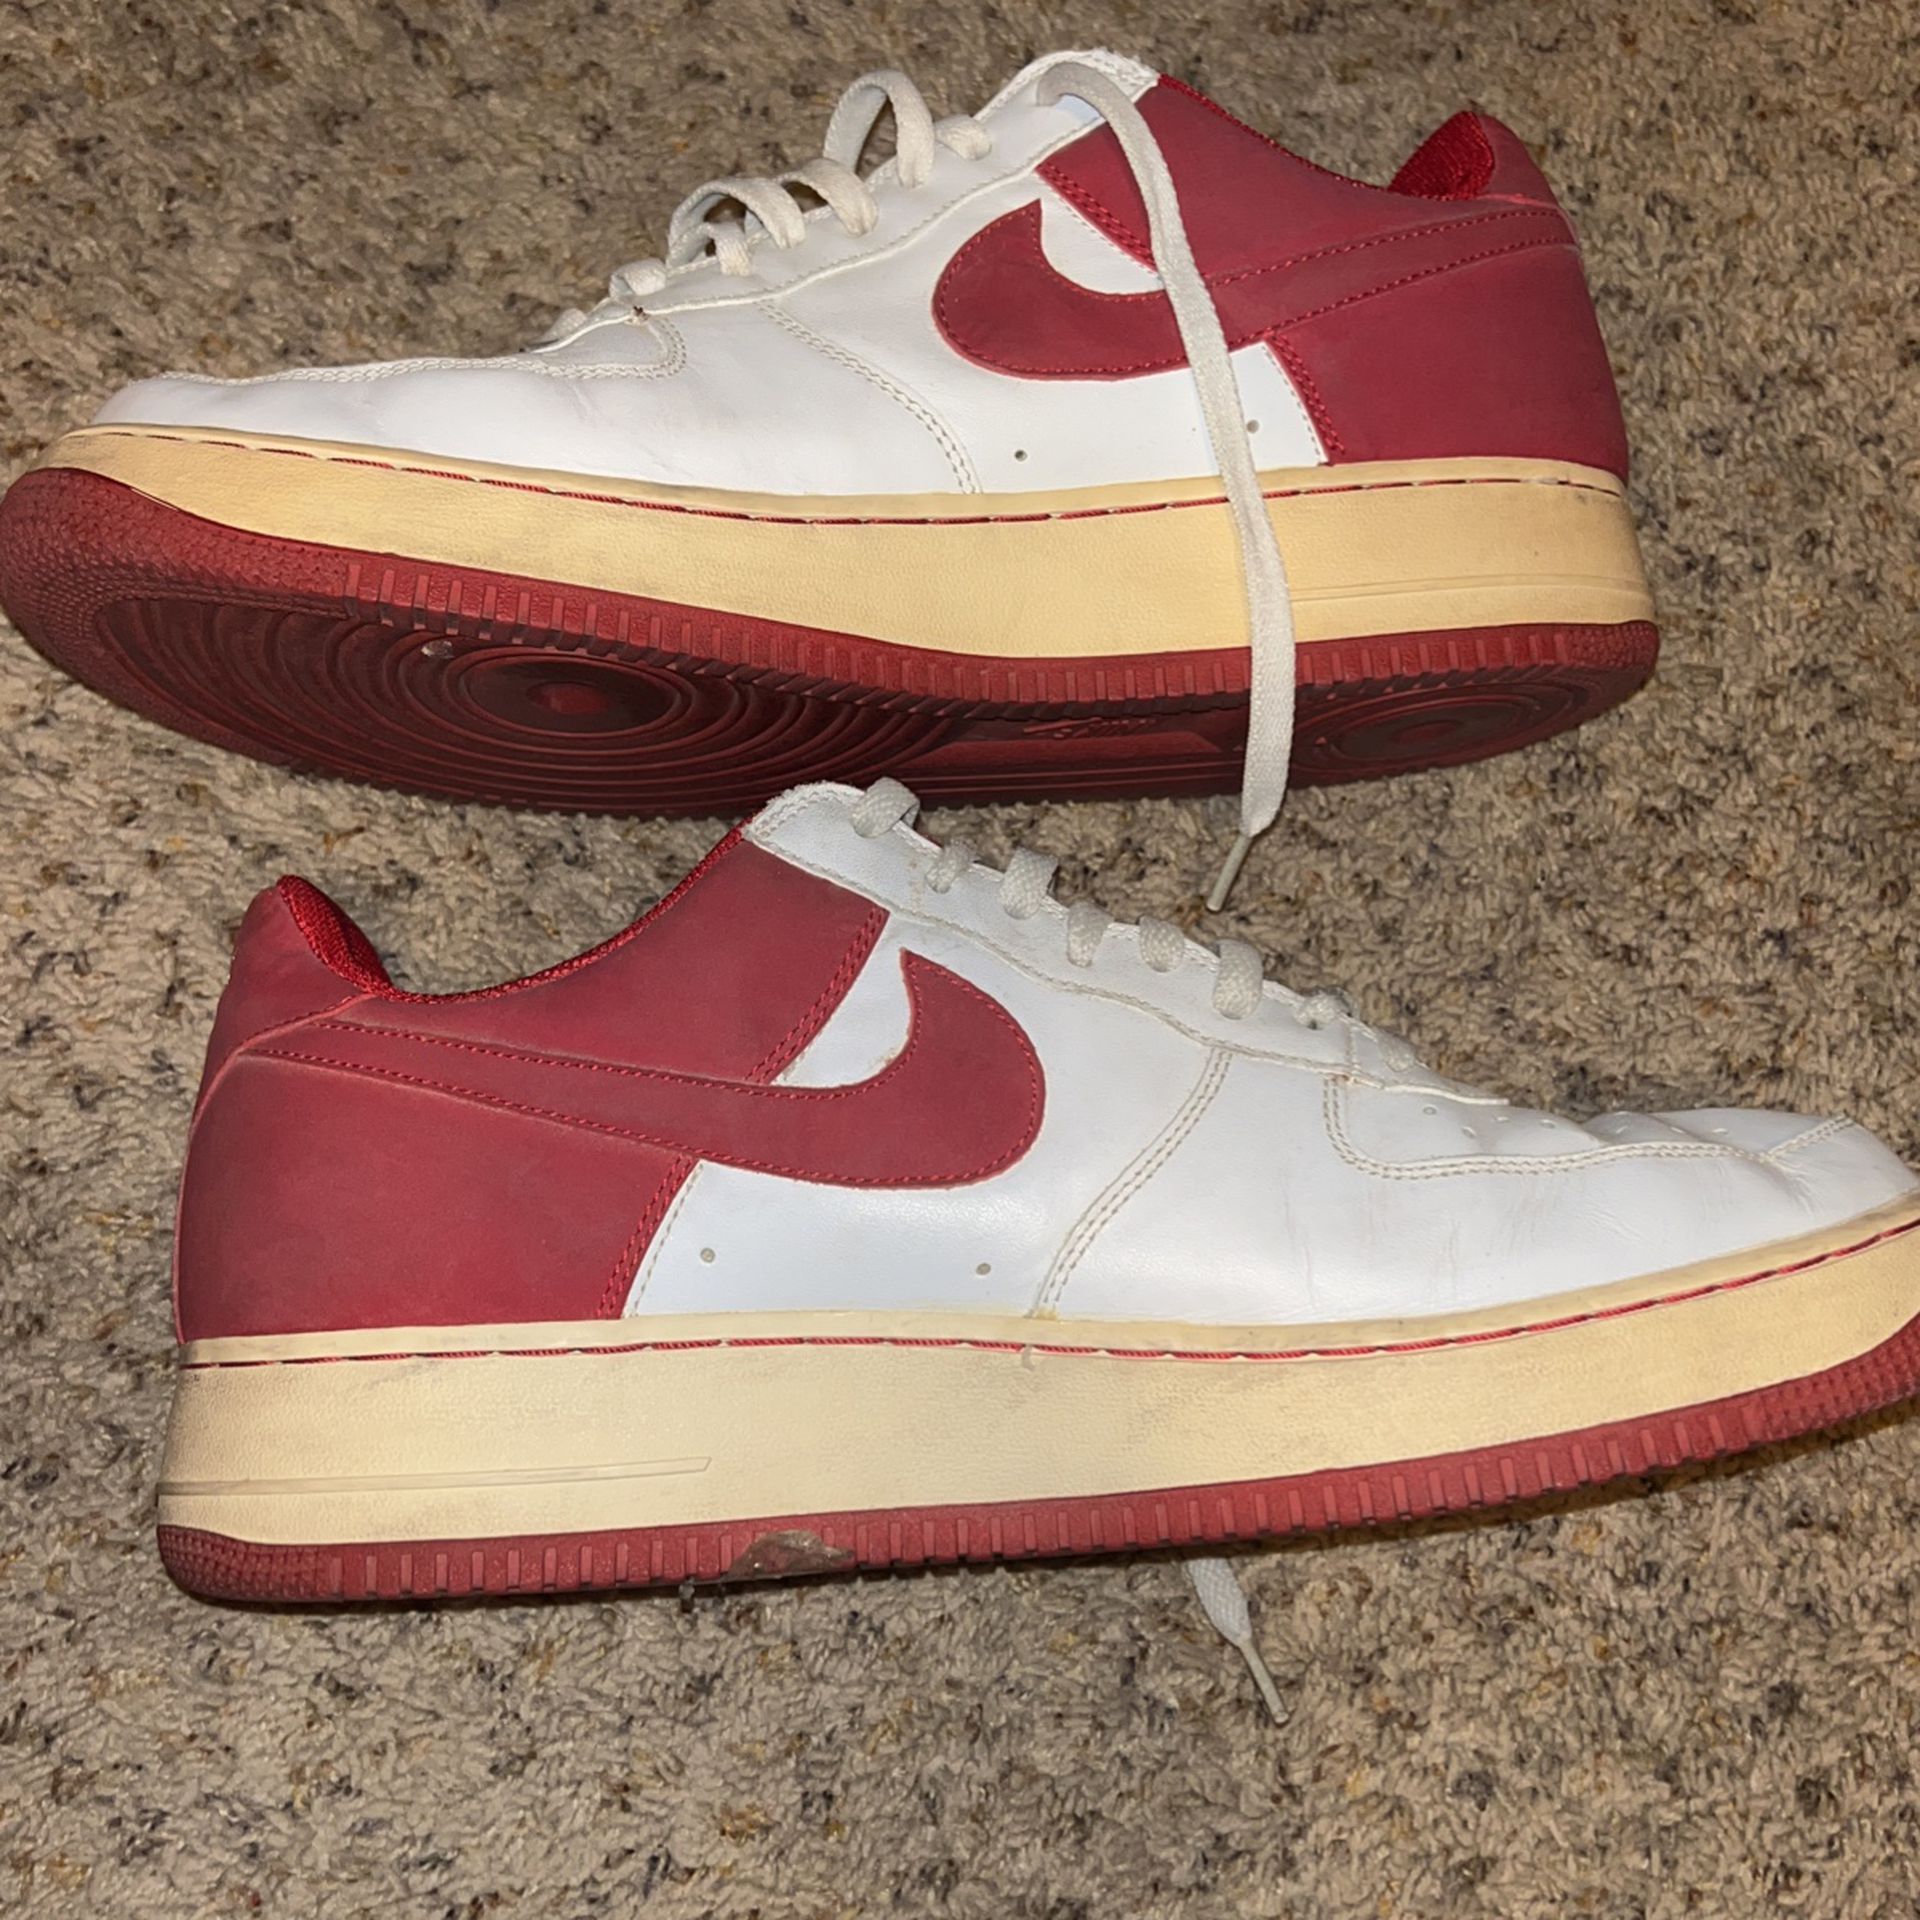 Nike Air Force 1 '82 Red And White for Sale in Glendale, AZ - OfferUp